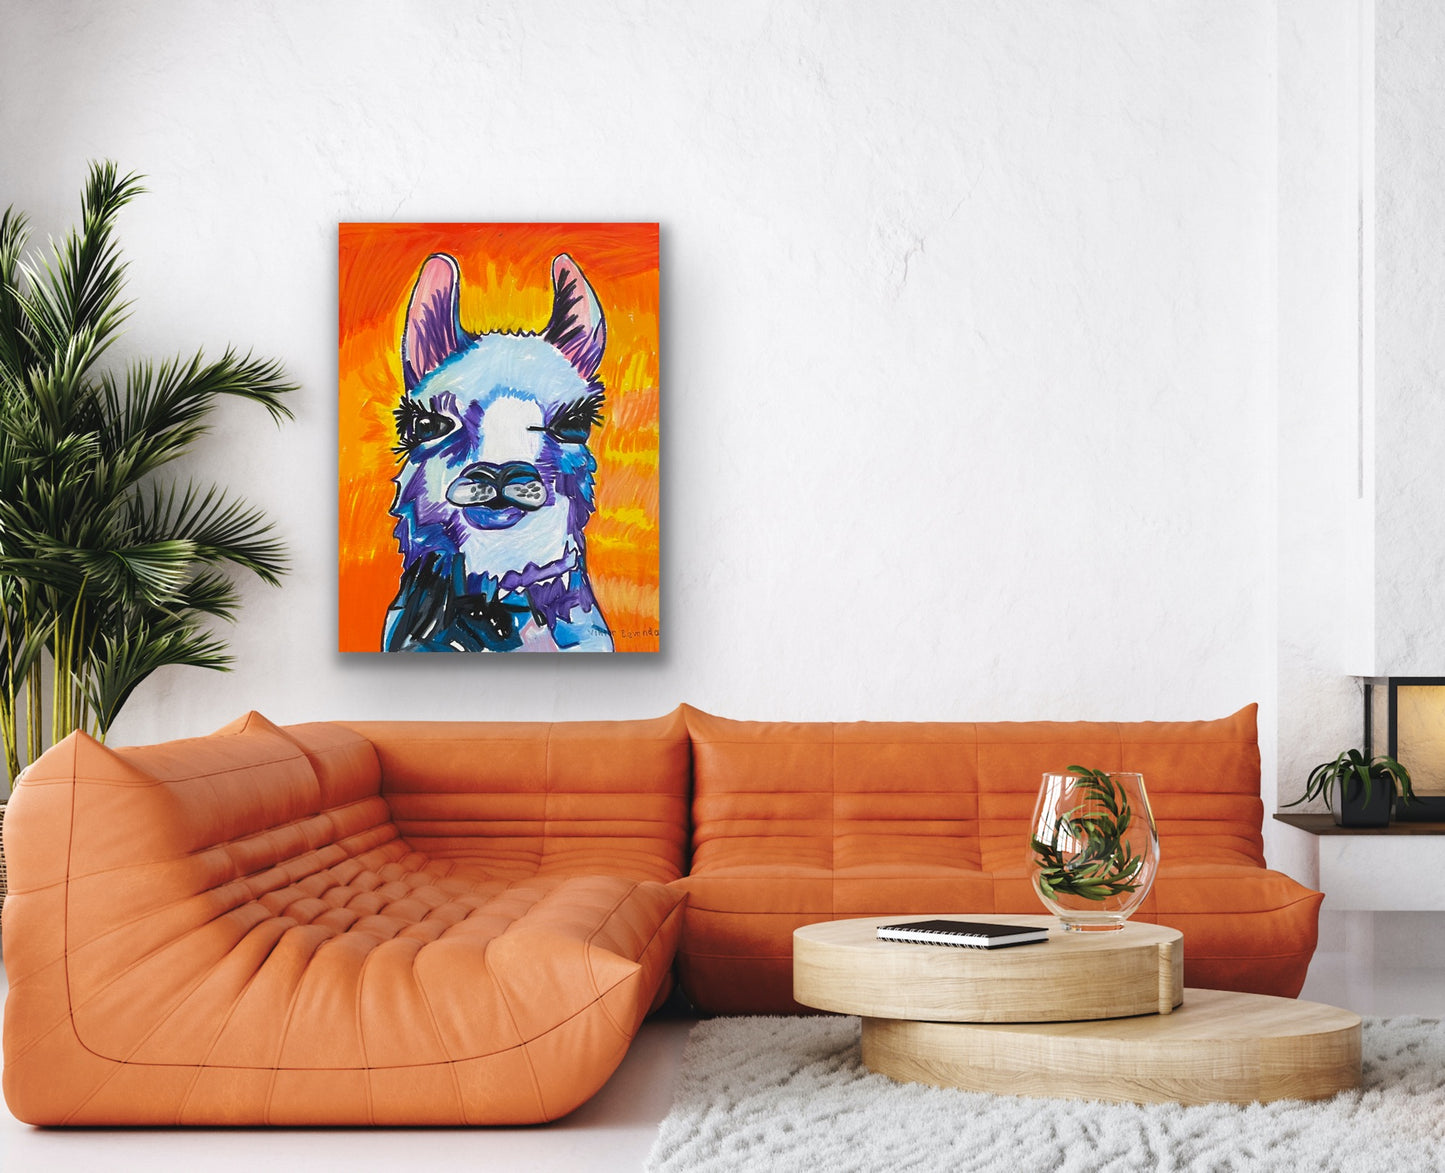 Llama - Stretched Canvas Print in more sizes